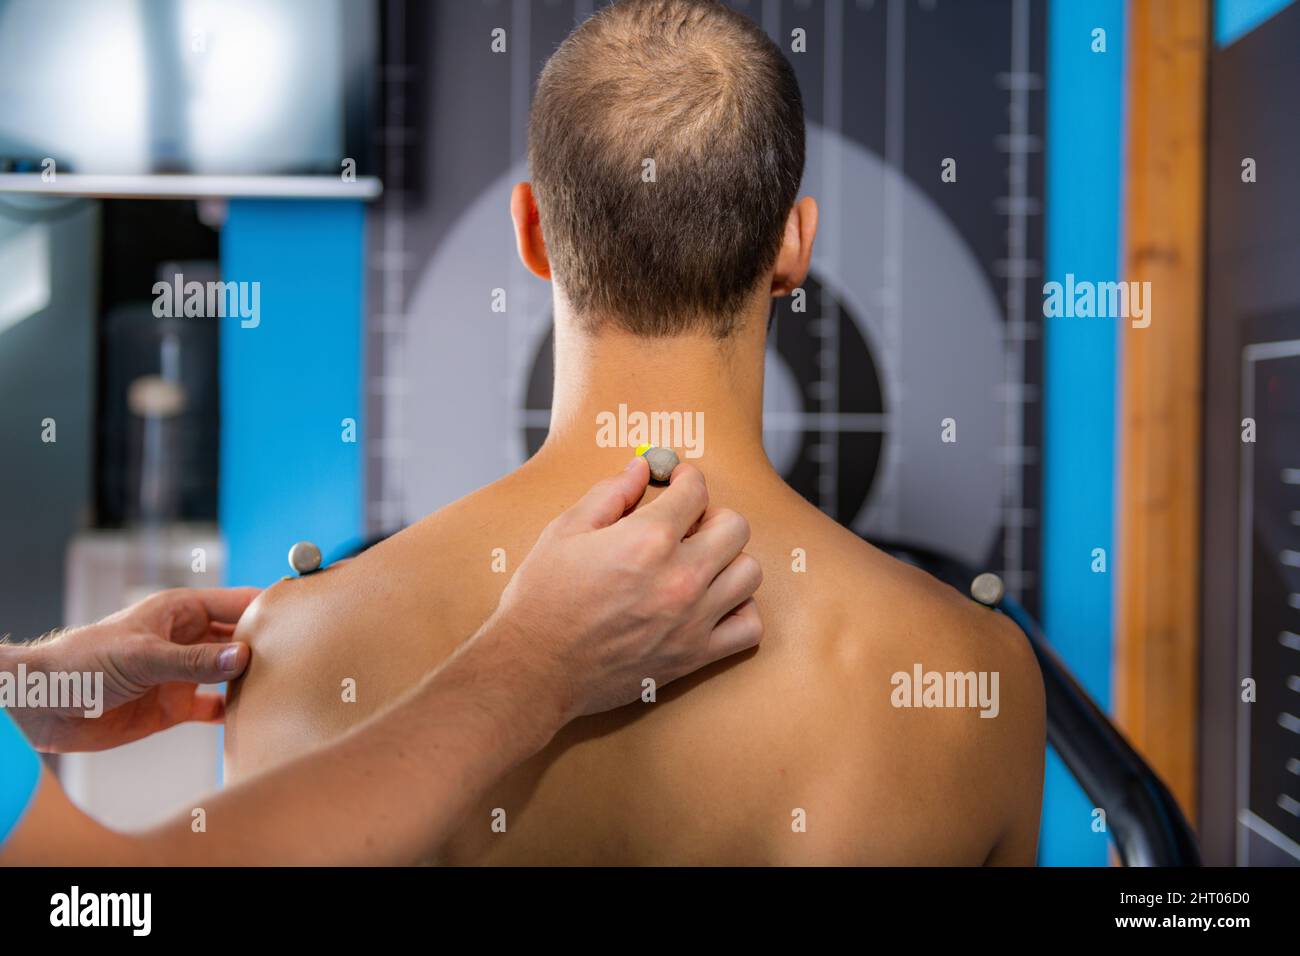 Placing markers on man's back for 3D gait analysis Stock Photo